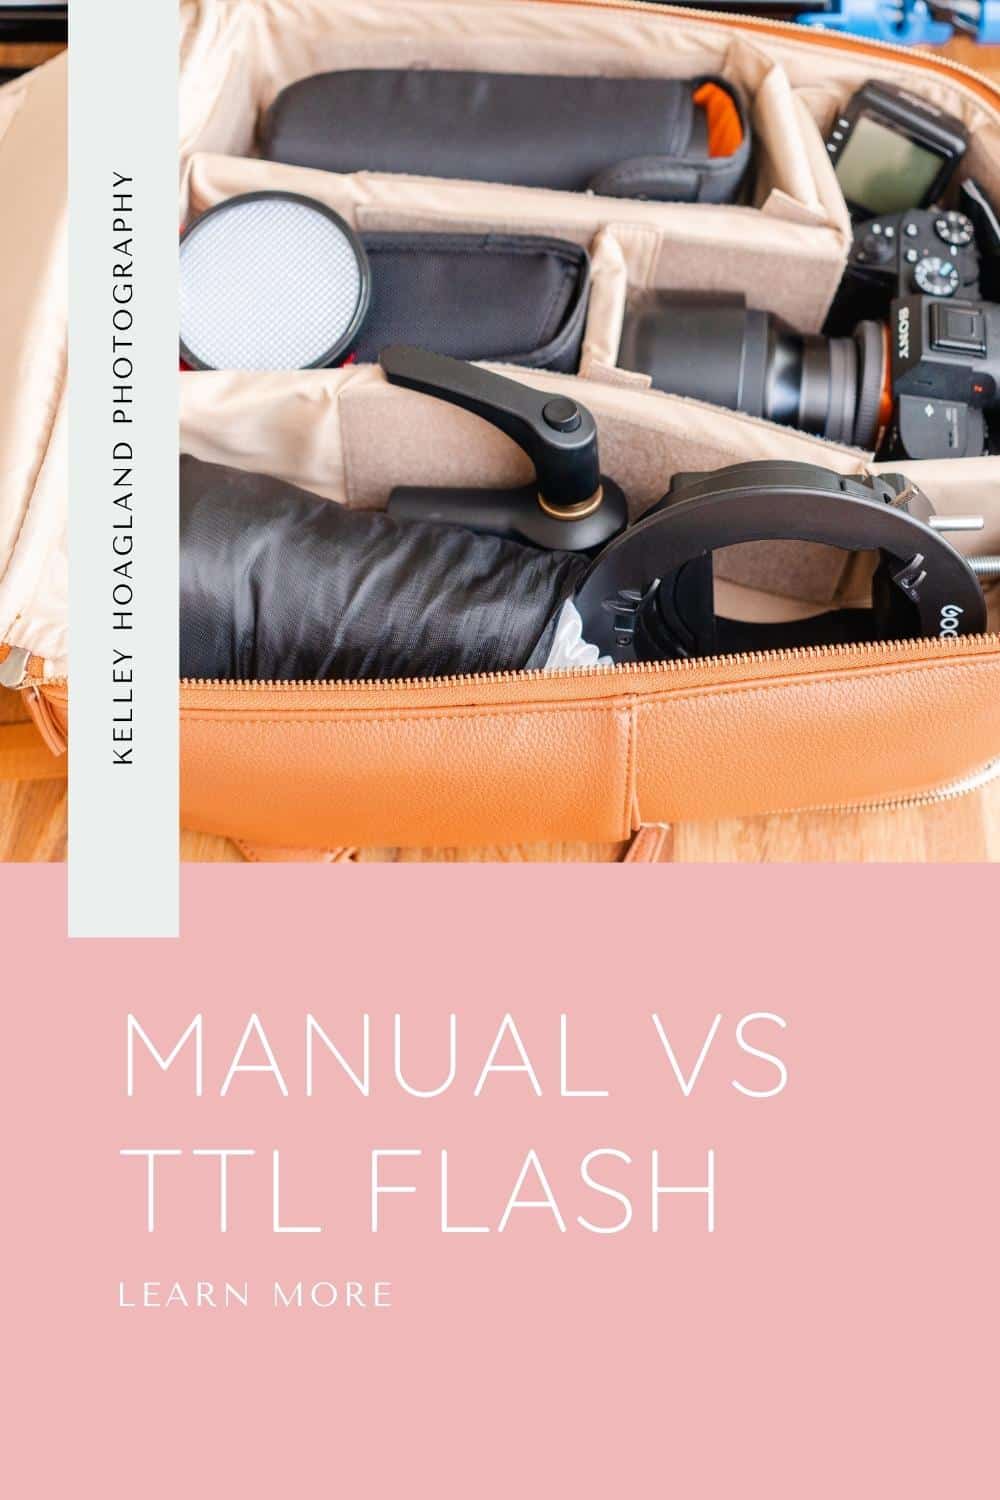 Manual vs TTL Flash? Which is better for using flash for indoor portraits